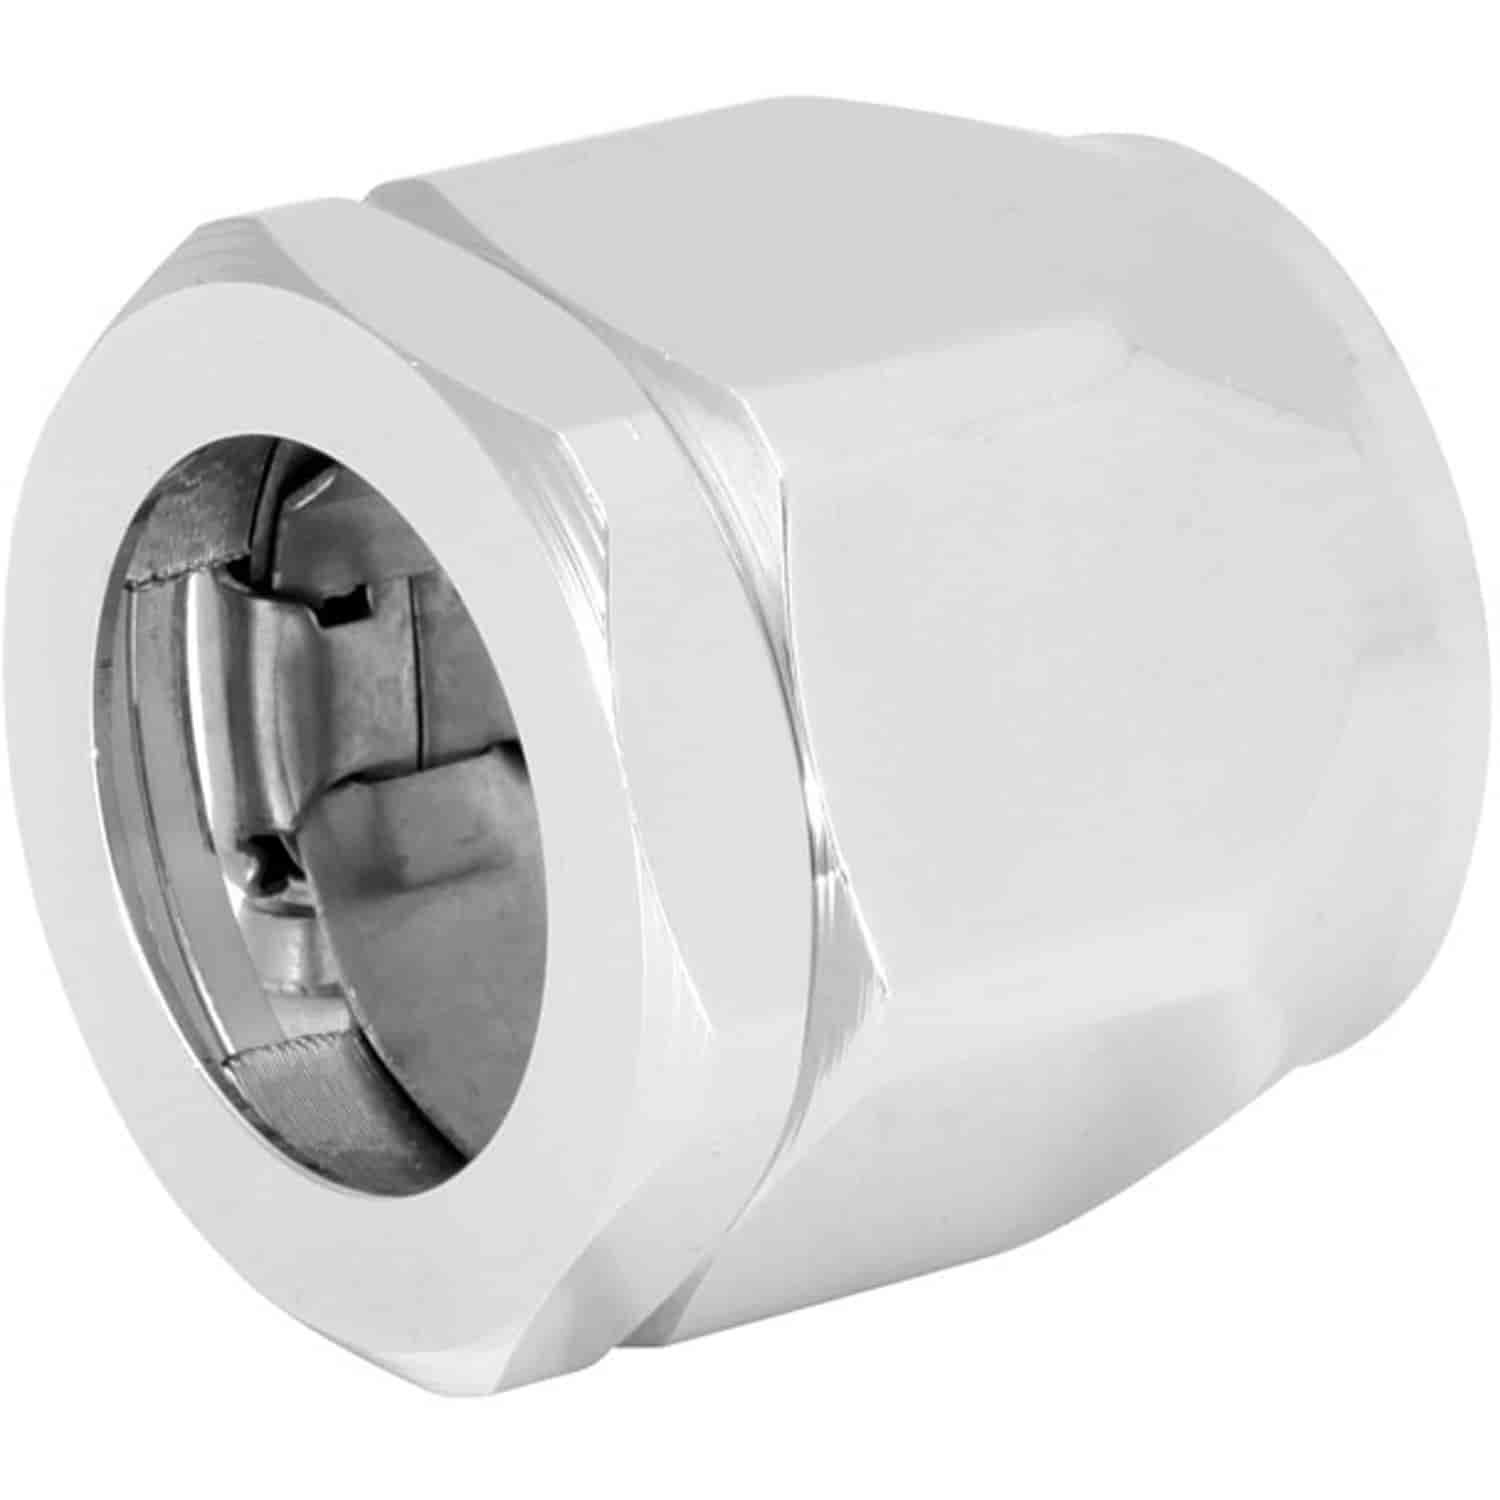 7/8 Inch Magna-Clamp For heater & water hose